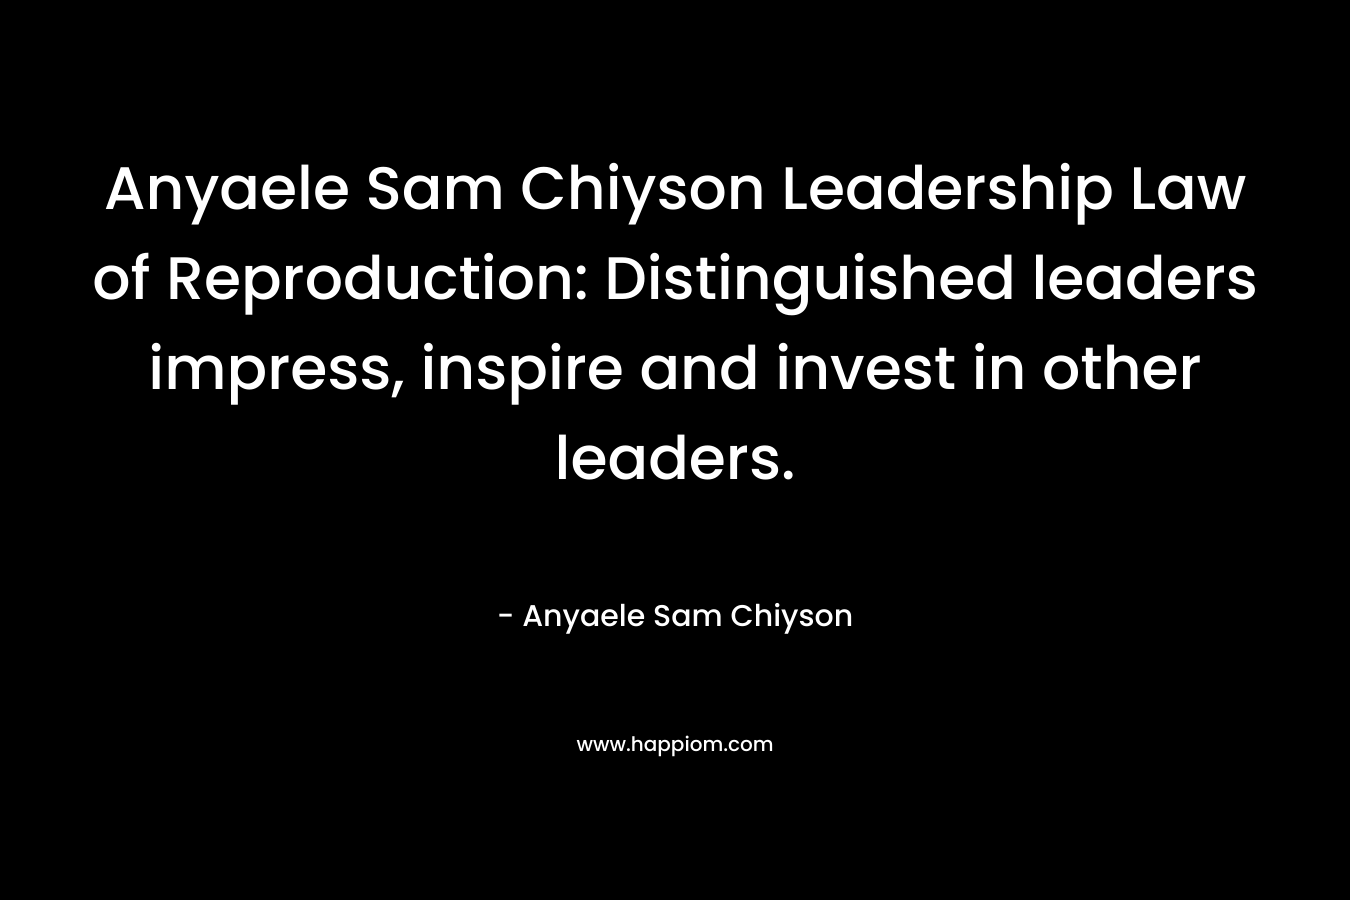 Anyaele Sam Chiyson Leadership Law of Reproduction: Distinguished leaders impress, inspire and invest in other leaders. – Anyaele Sam Chiyson